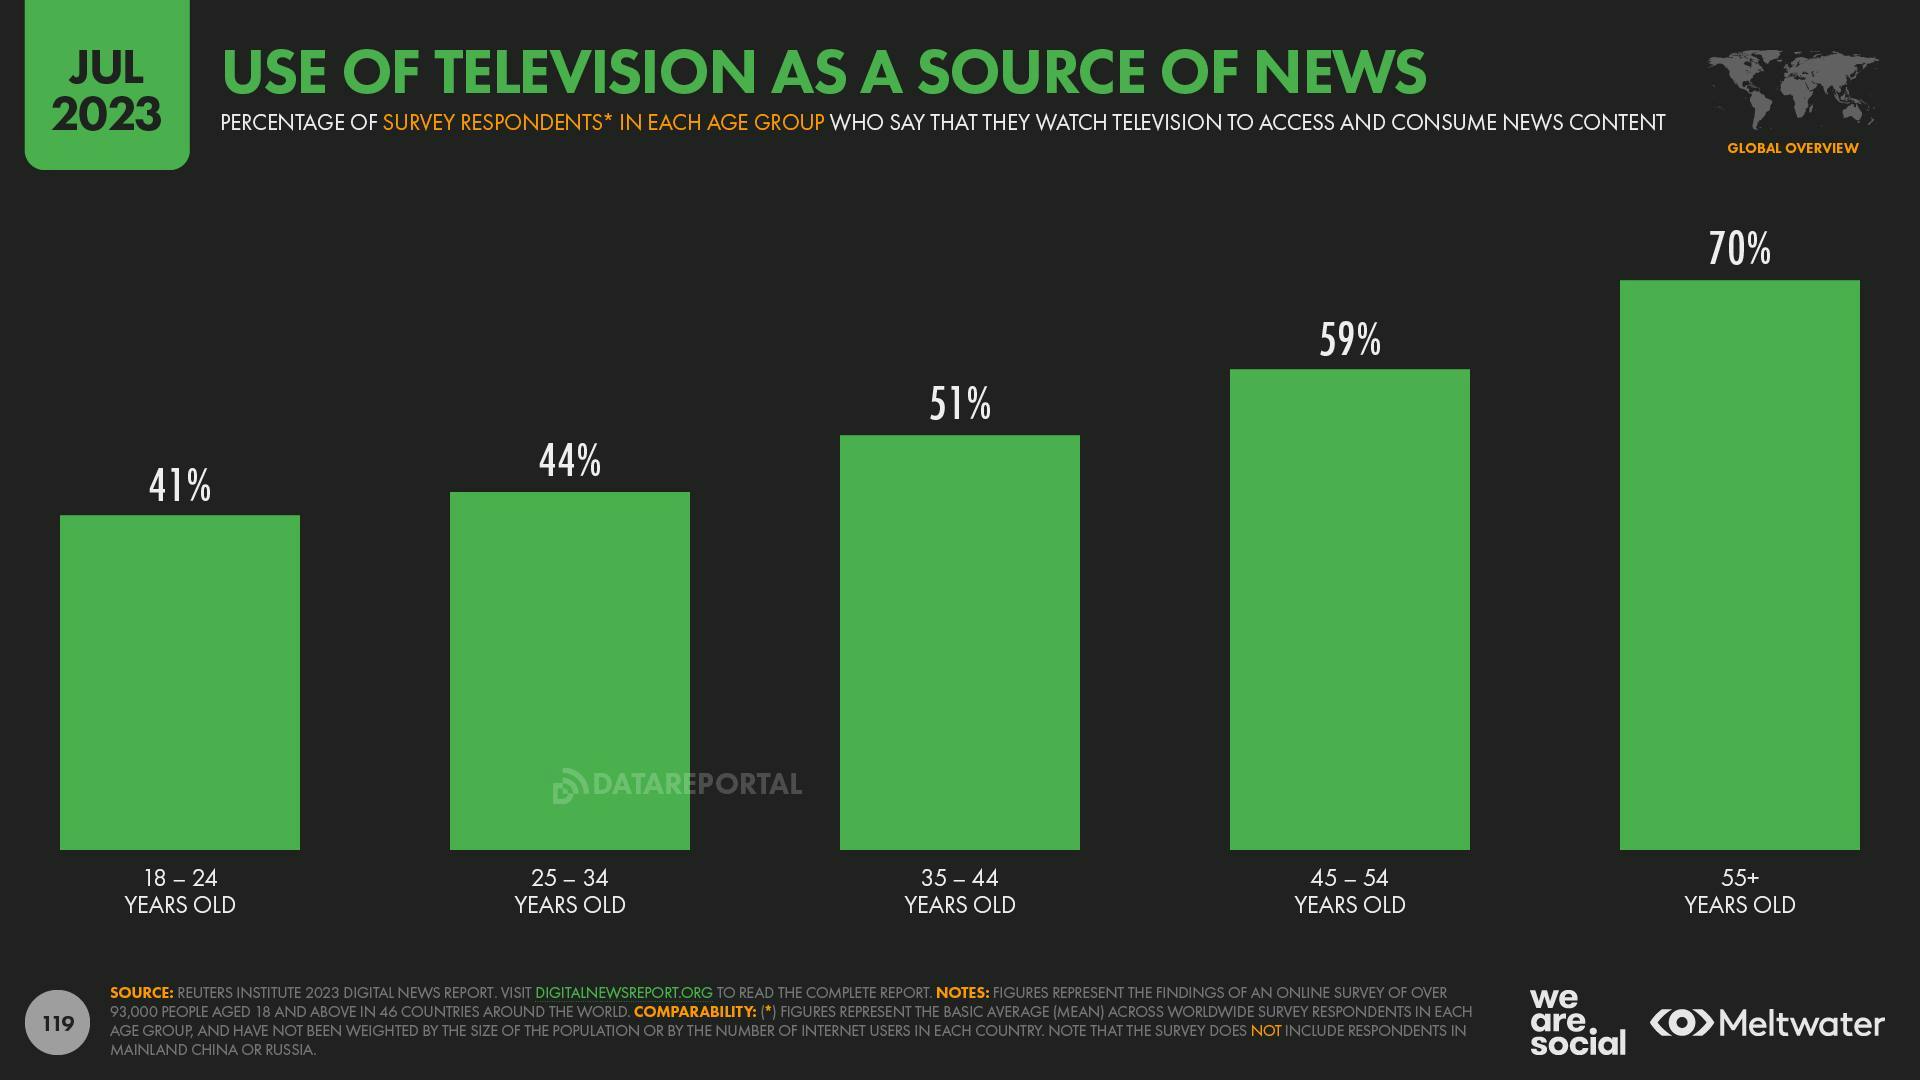 A bar chart showing that the percentage of people who use television as a source of news increases with age rage, with the highest percentage, 70%, belonging to the 55+ age group.